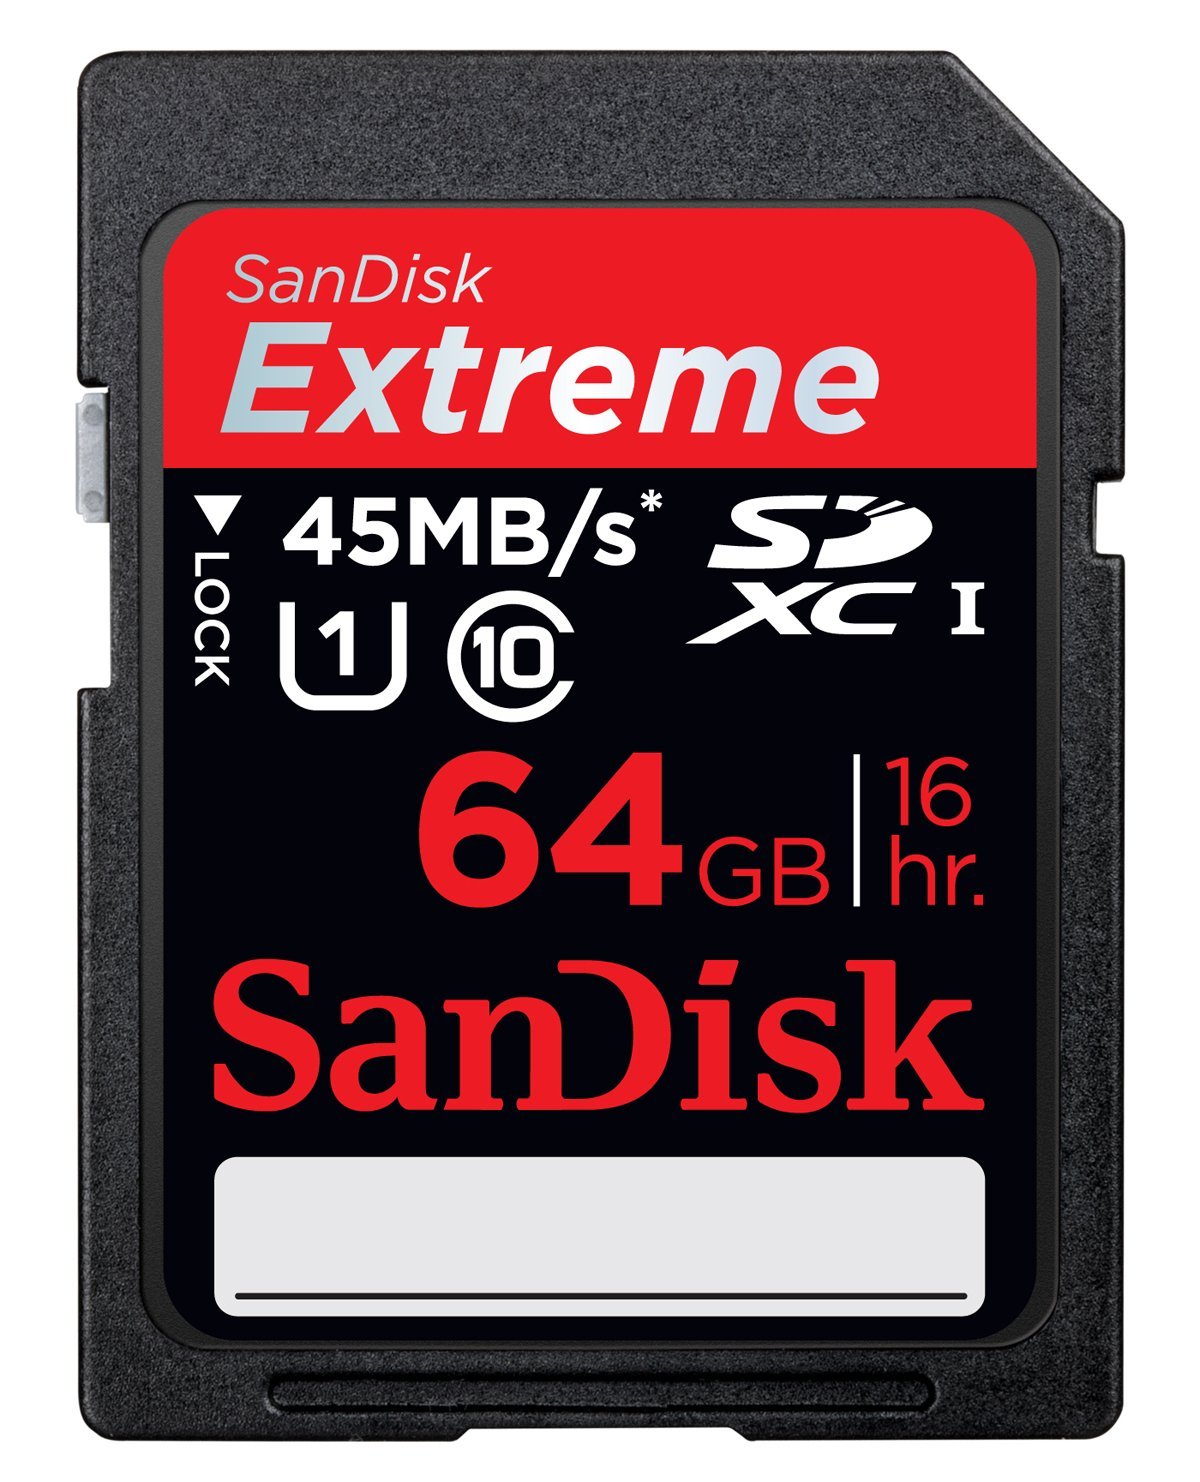 SanDisk Extreme 64 GB SDXC Class 10 UHS-1 Flash Memory Card 45MB